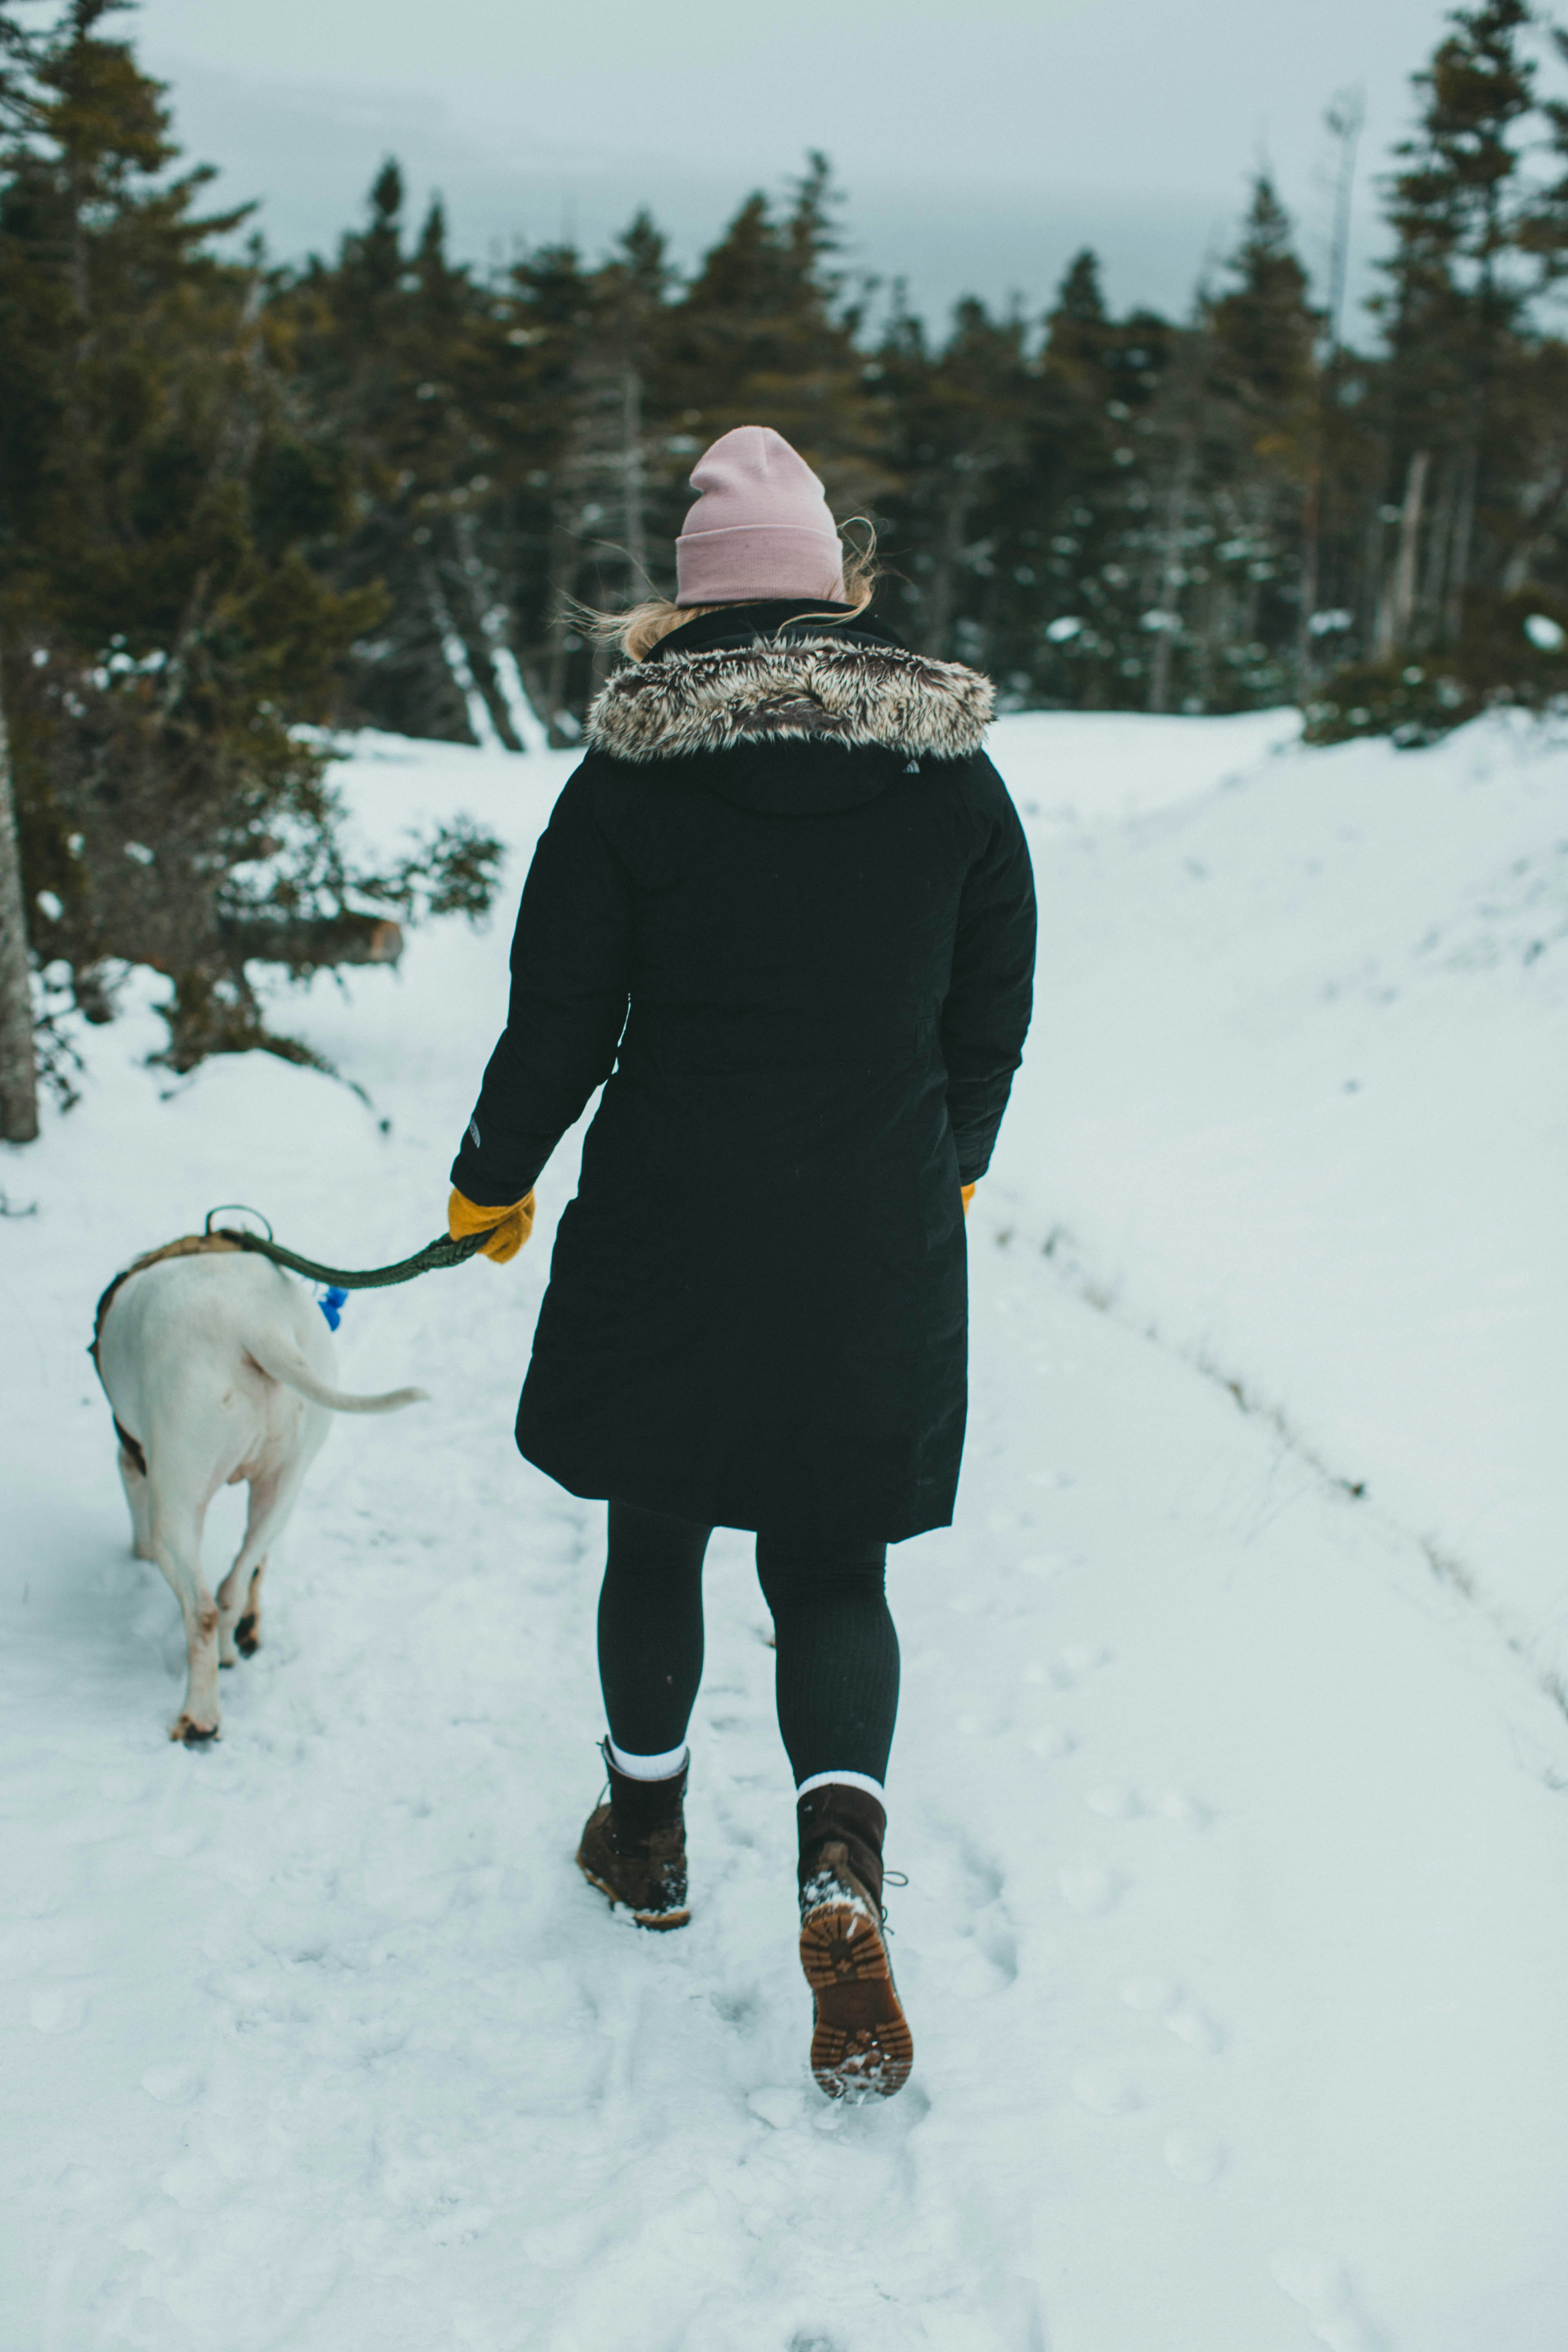 woman in black coat and white knit cap walking with white dog on snow covered ground